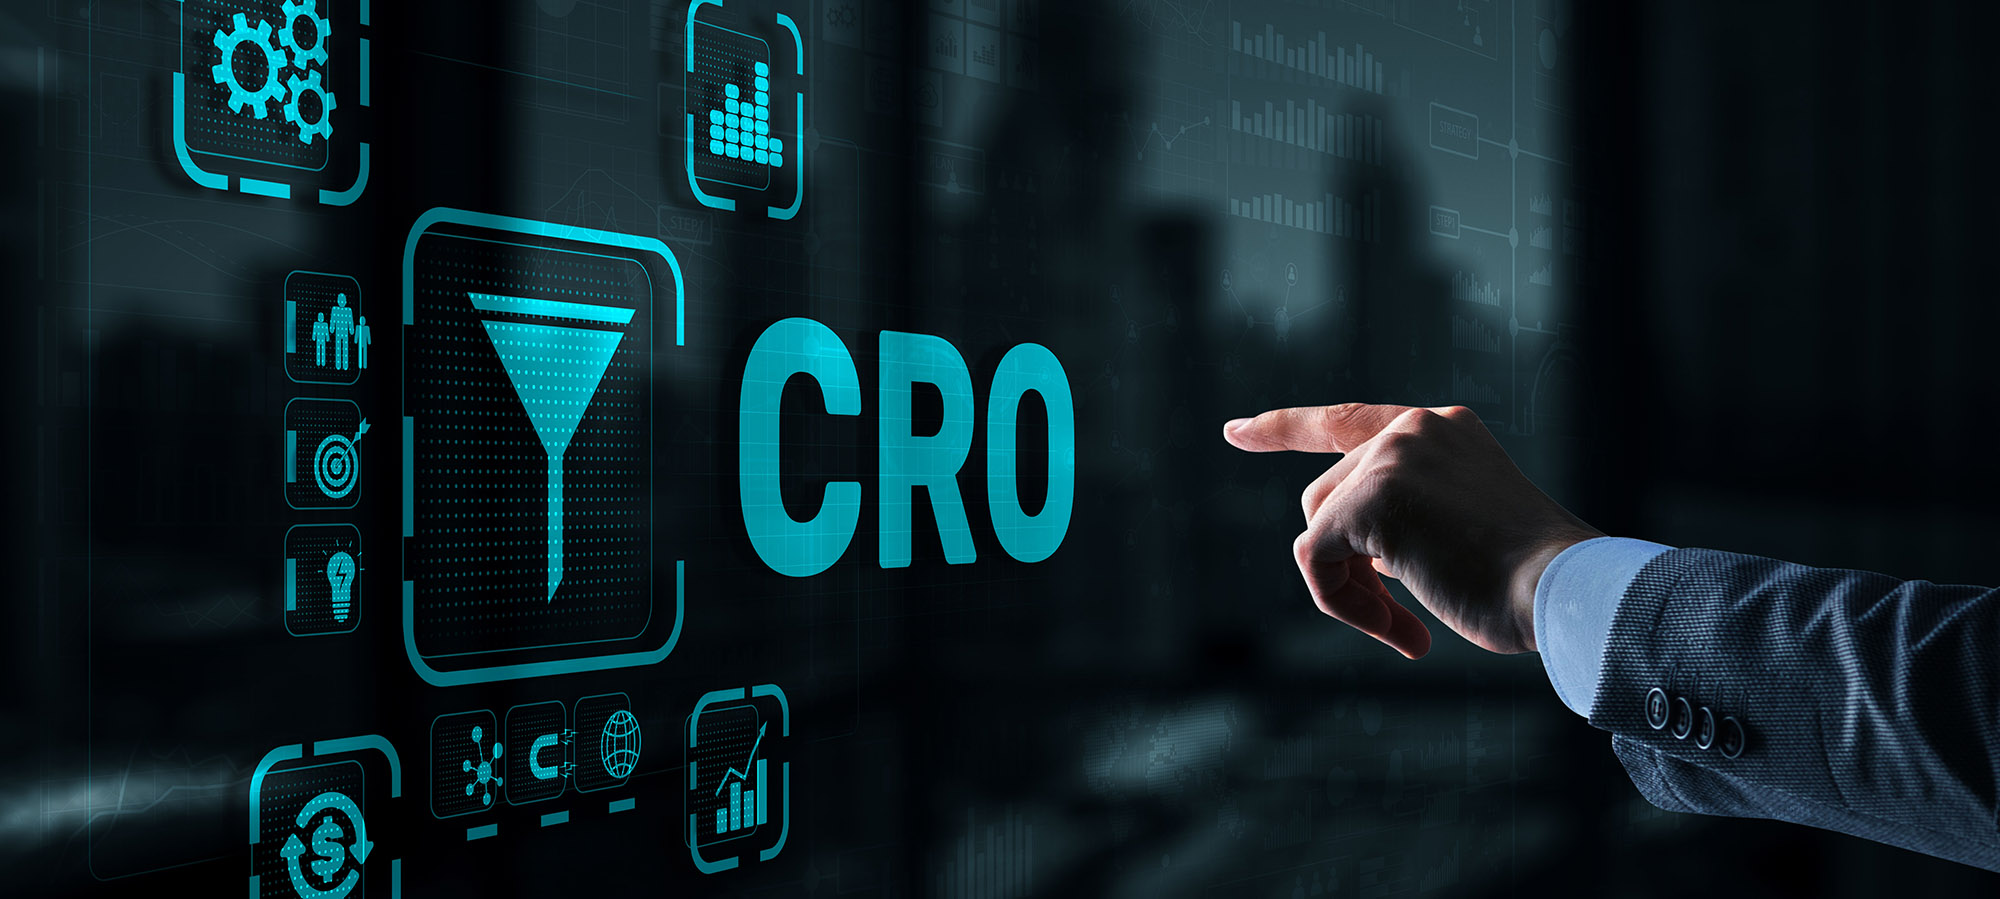 Understanding the Basics: What is SEO, CRO, and UX?